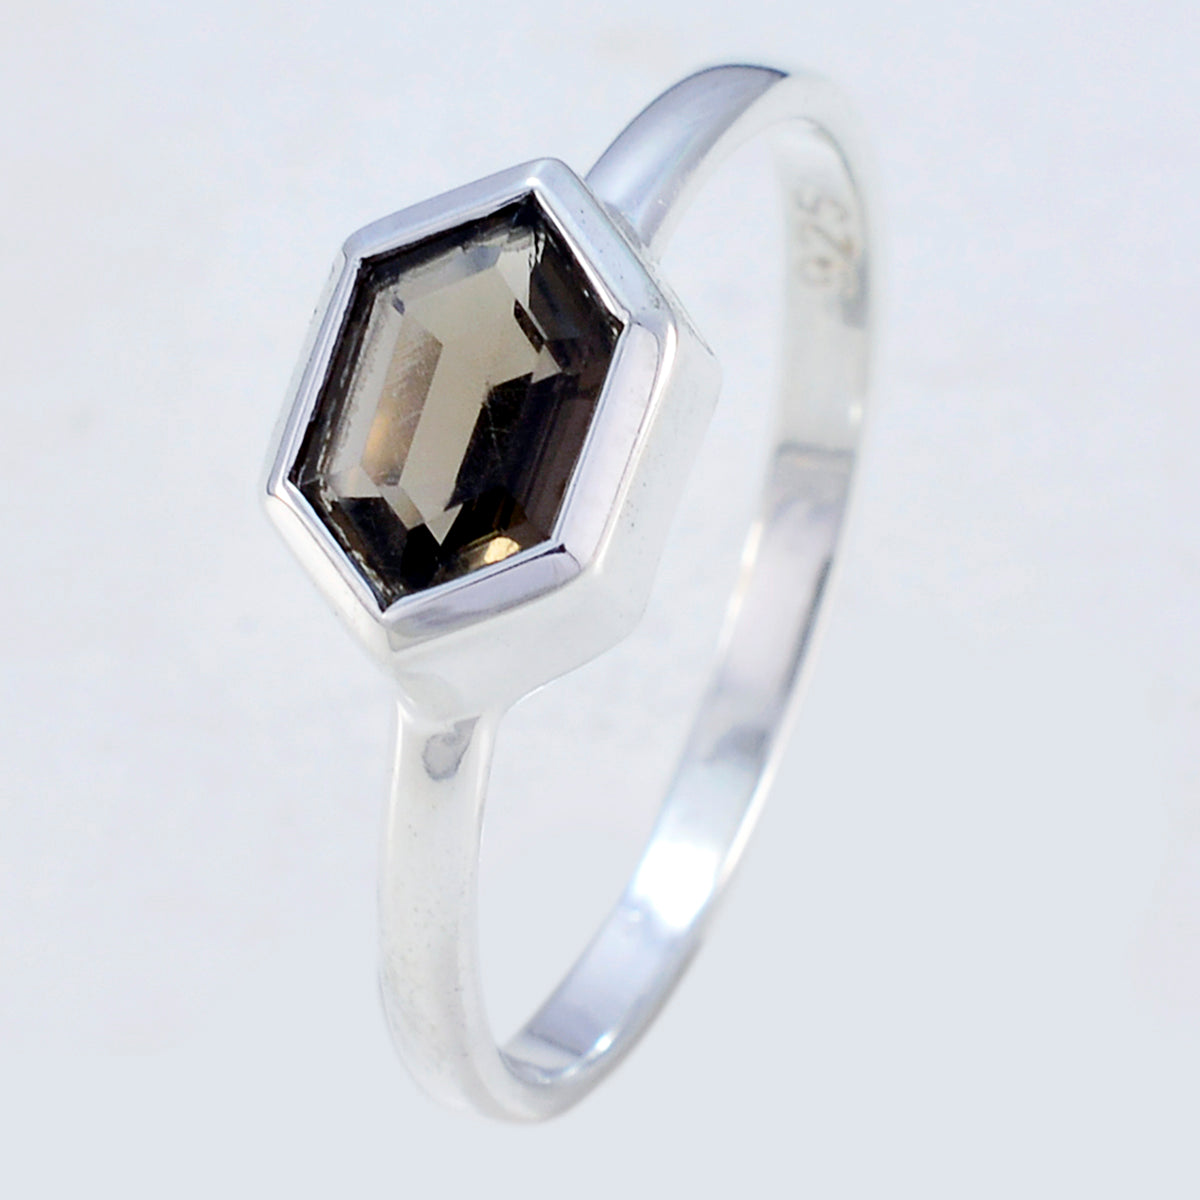 Magnificent Stone Smoky Quartz Solid Silver Ring Jewelry Stores Online